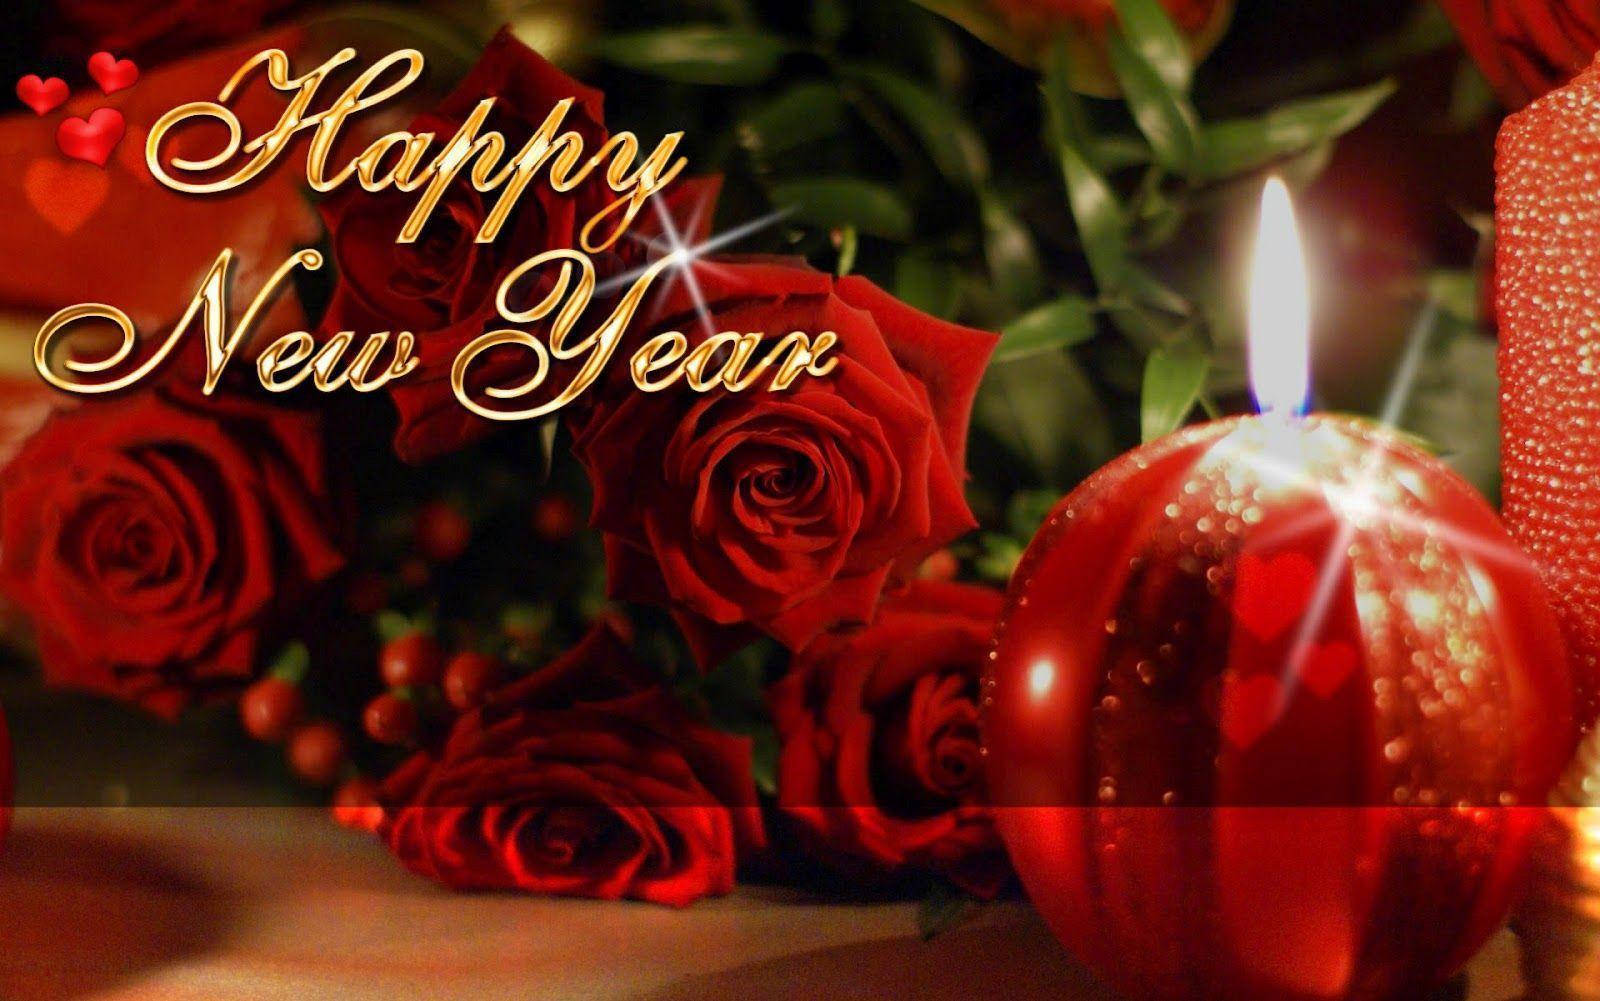 Happy New Year 2021 Greeting With Red Roses Background